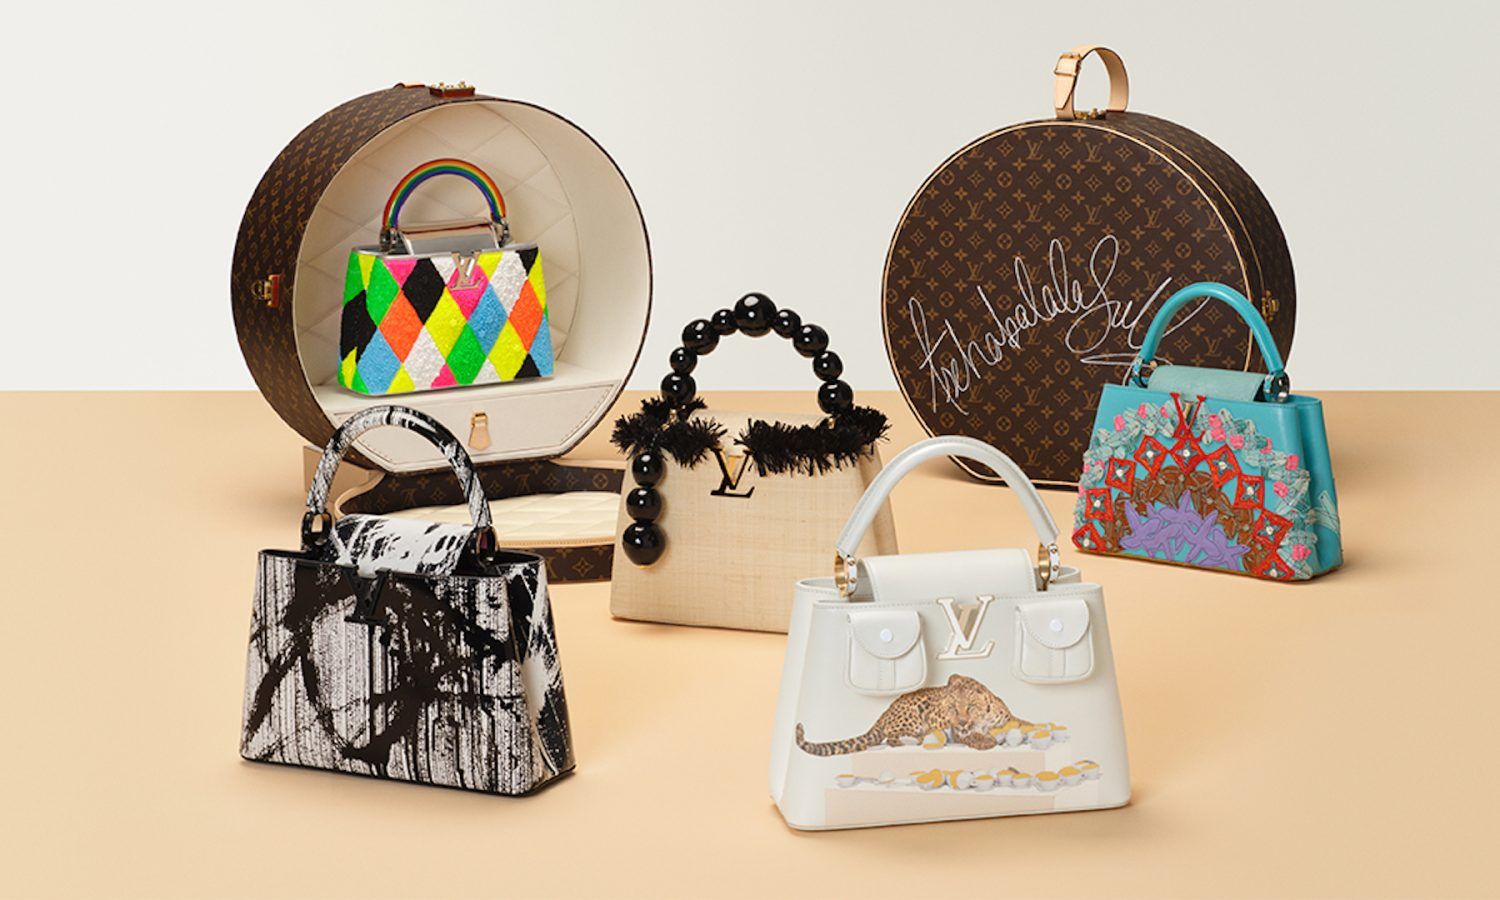 Sotheby's and Louis Vuitton are auctioning 22 new Artycapucines bags